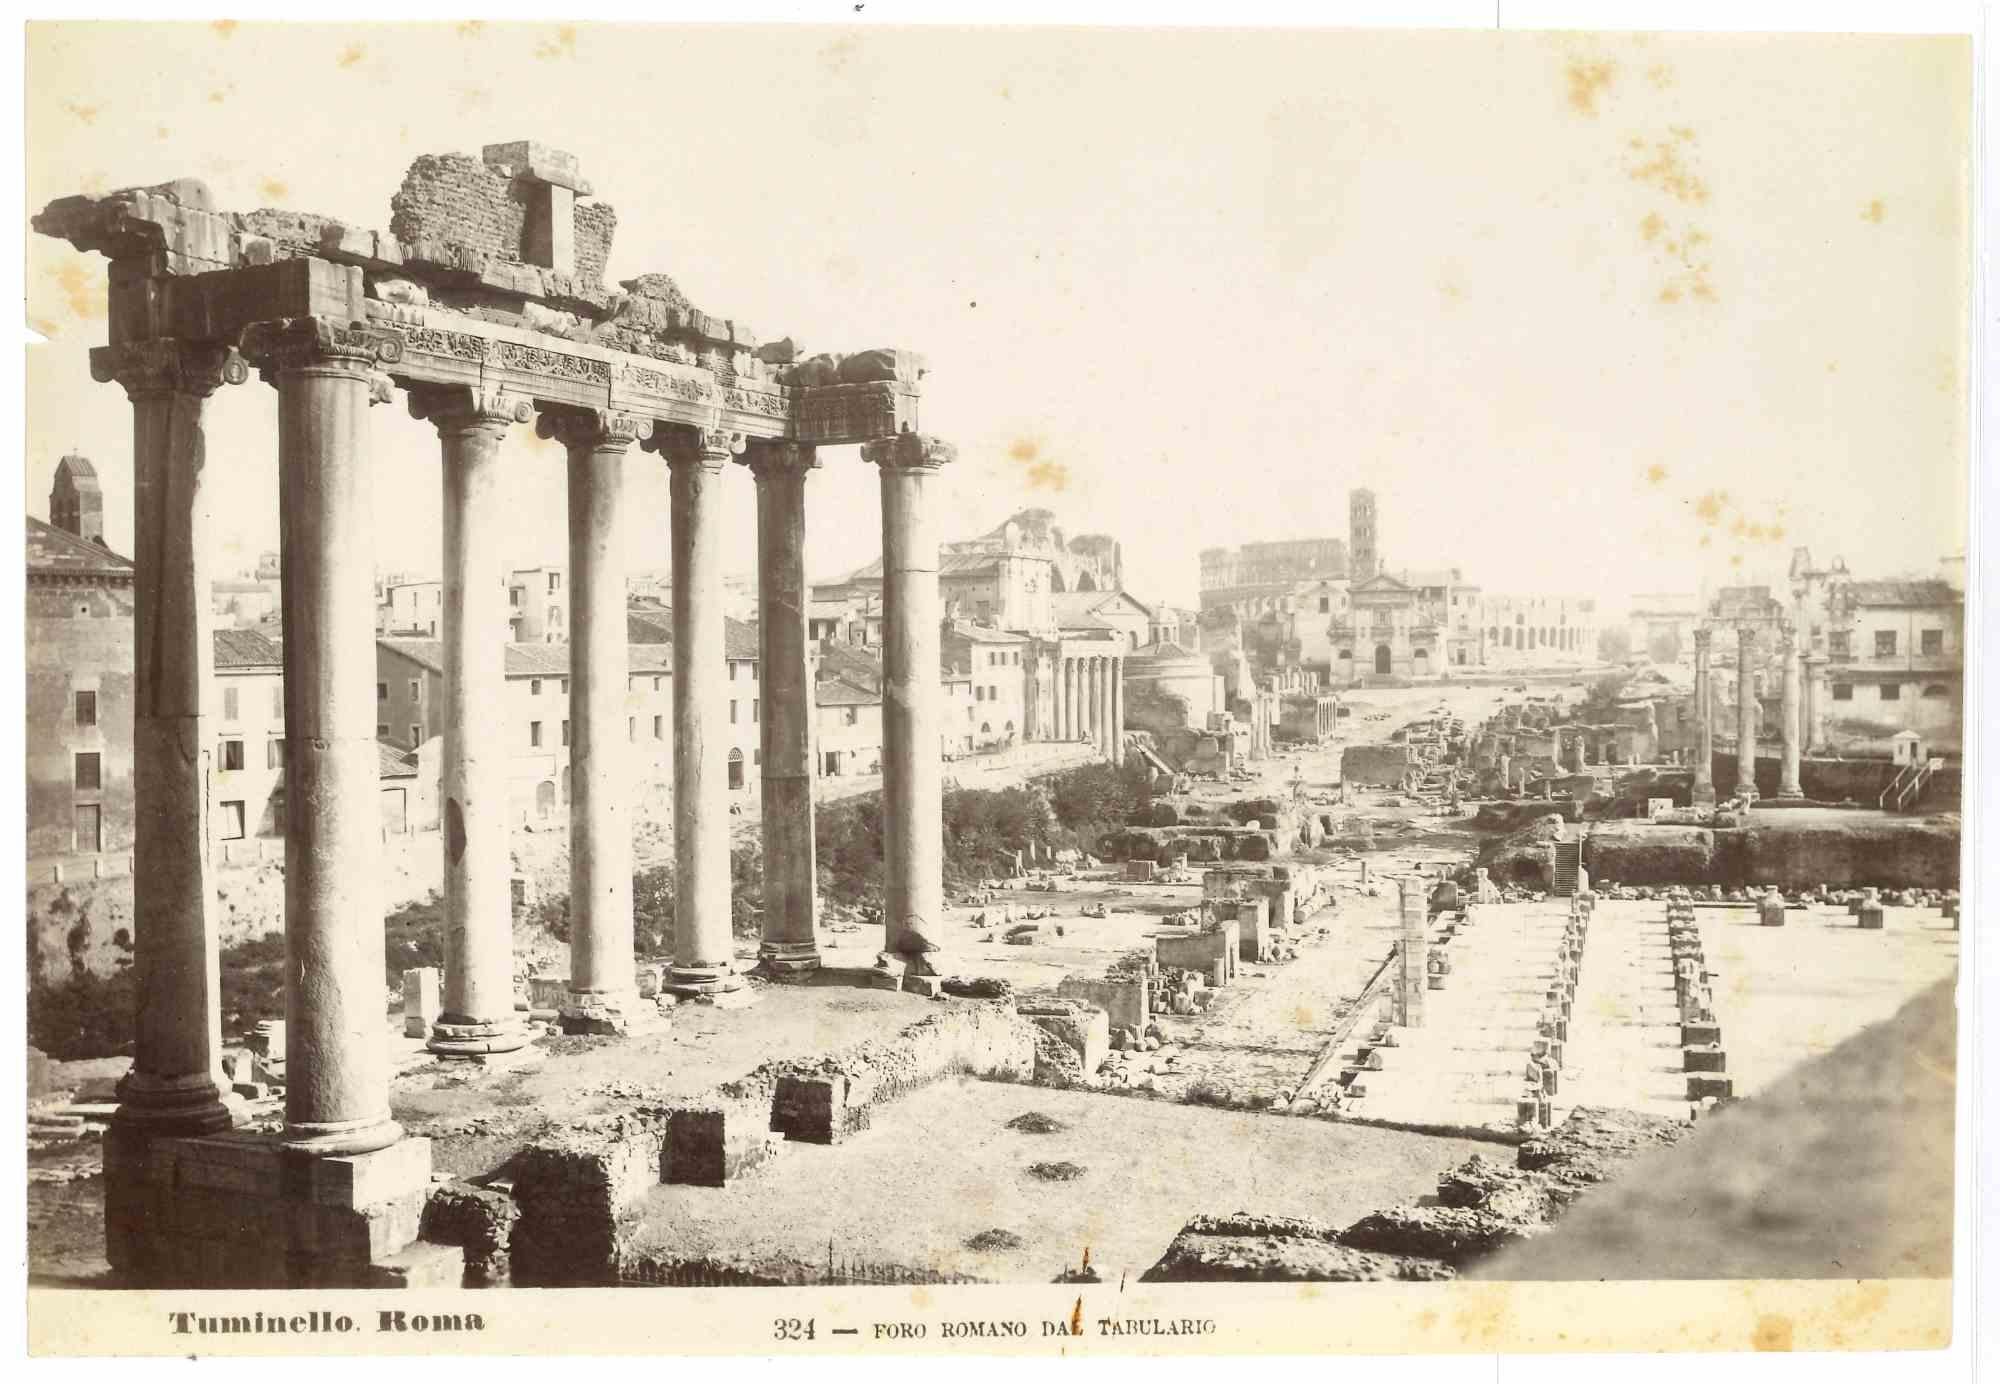 Roman Forum - Vintage Photo by Ludovico Tuminello - Early 20th Century